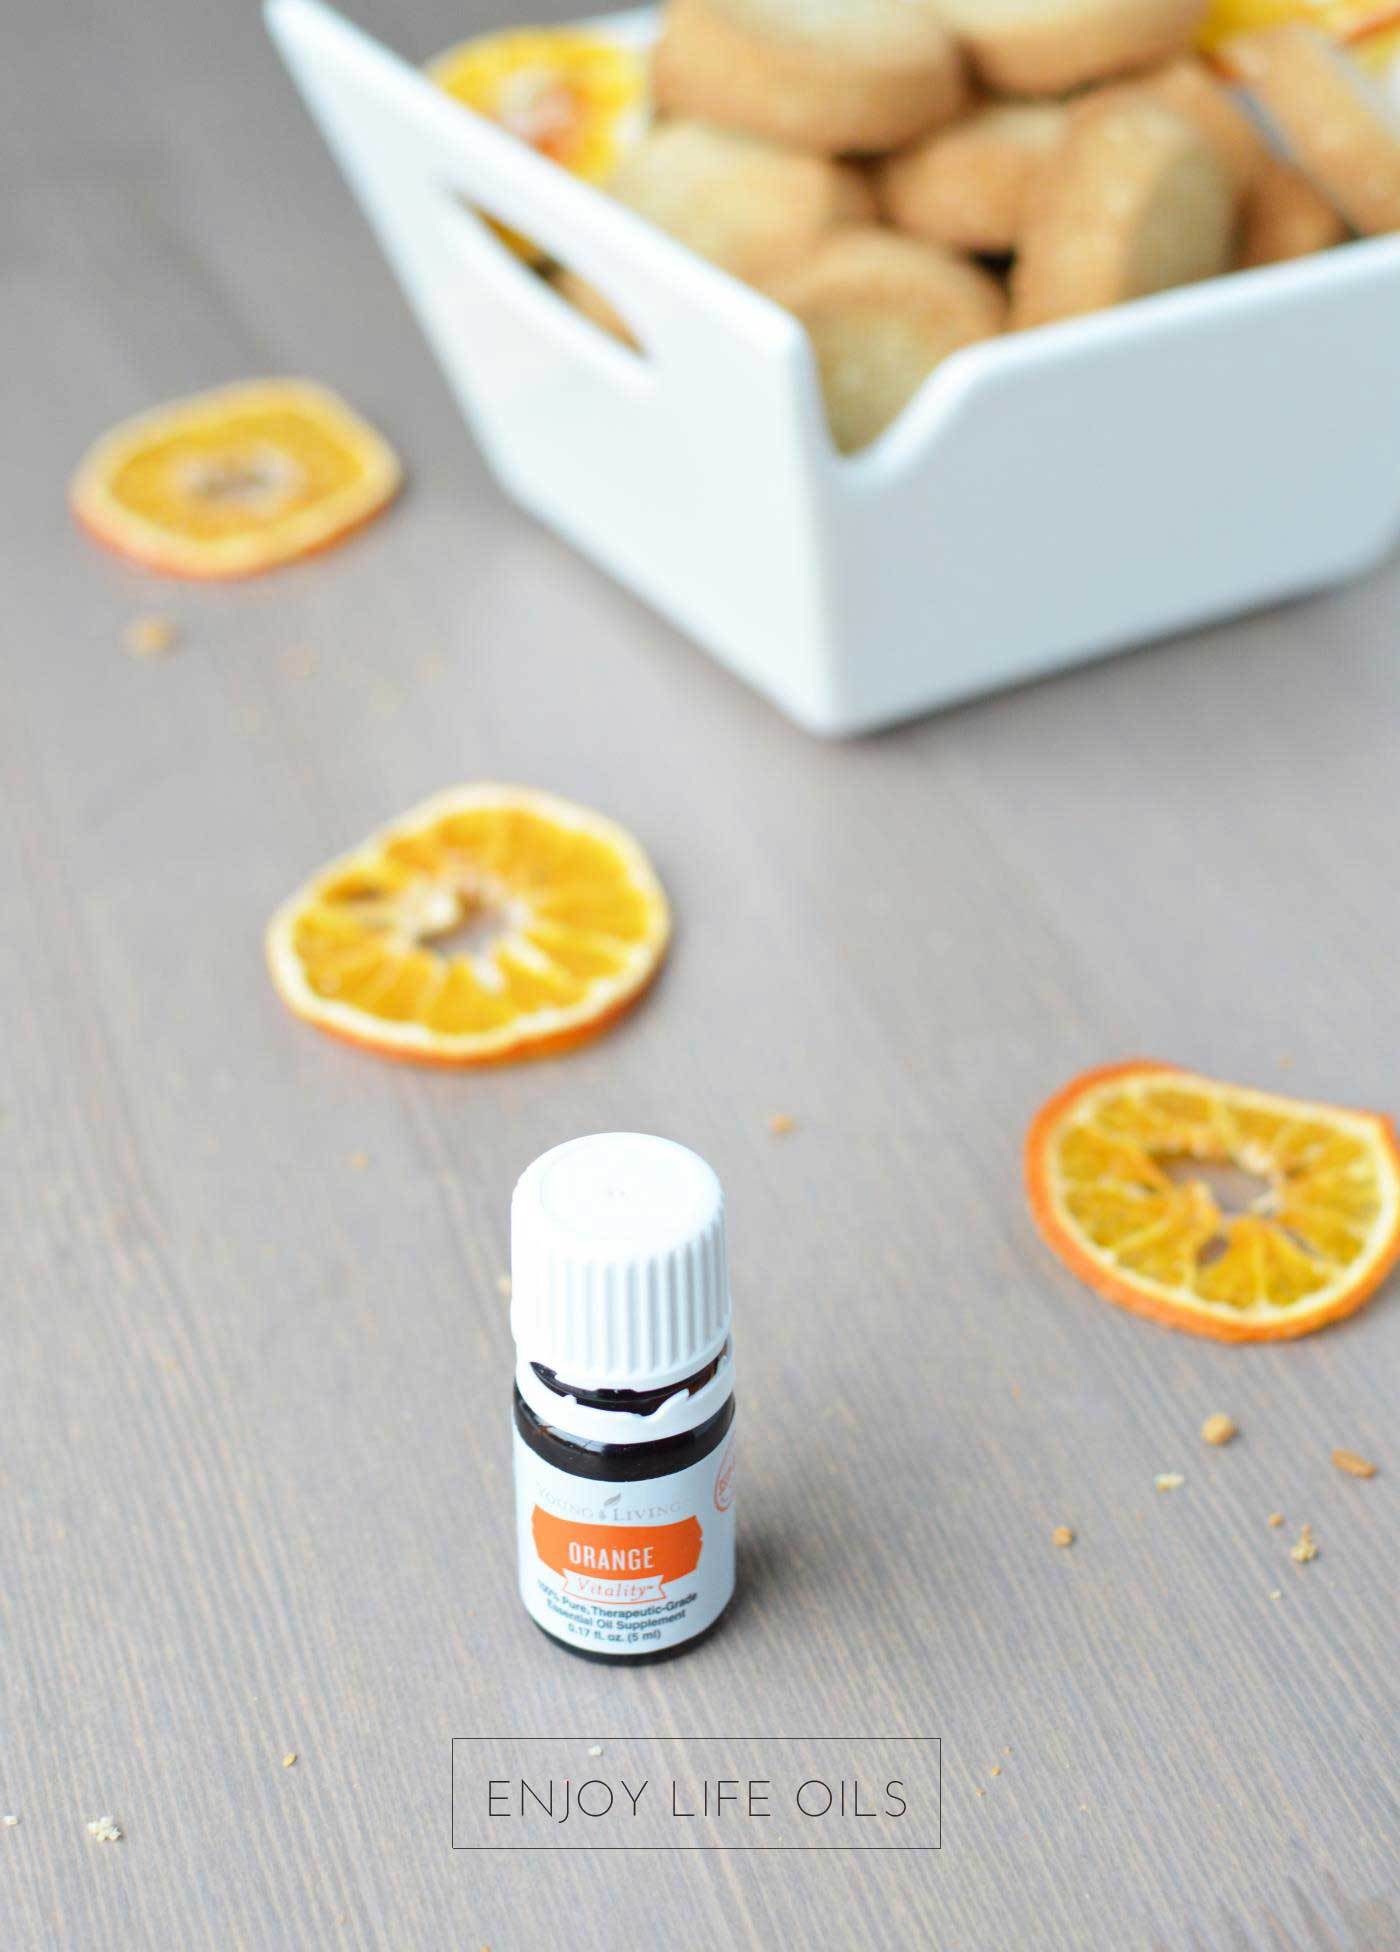 cooking with essential oils. Make shortbread with Orange Vitality from Young Living